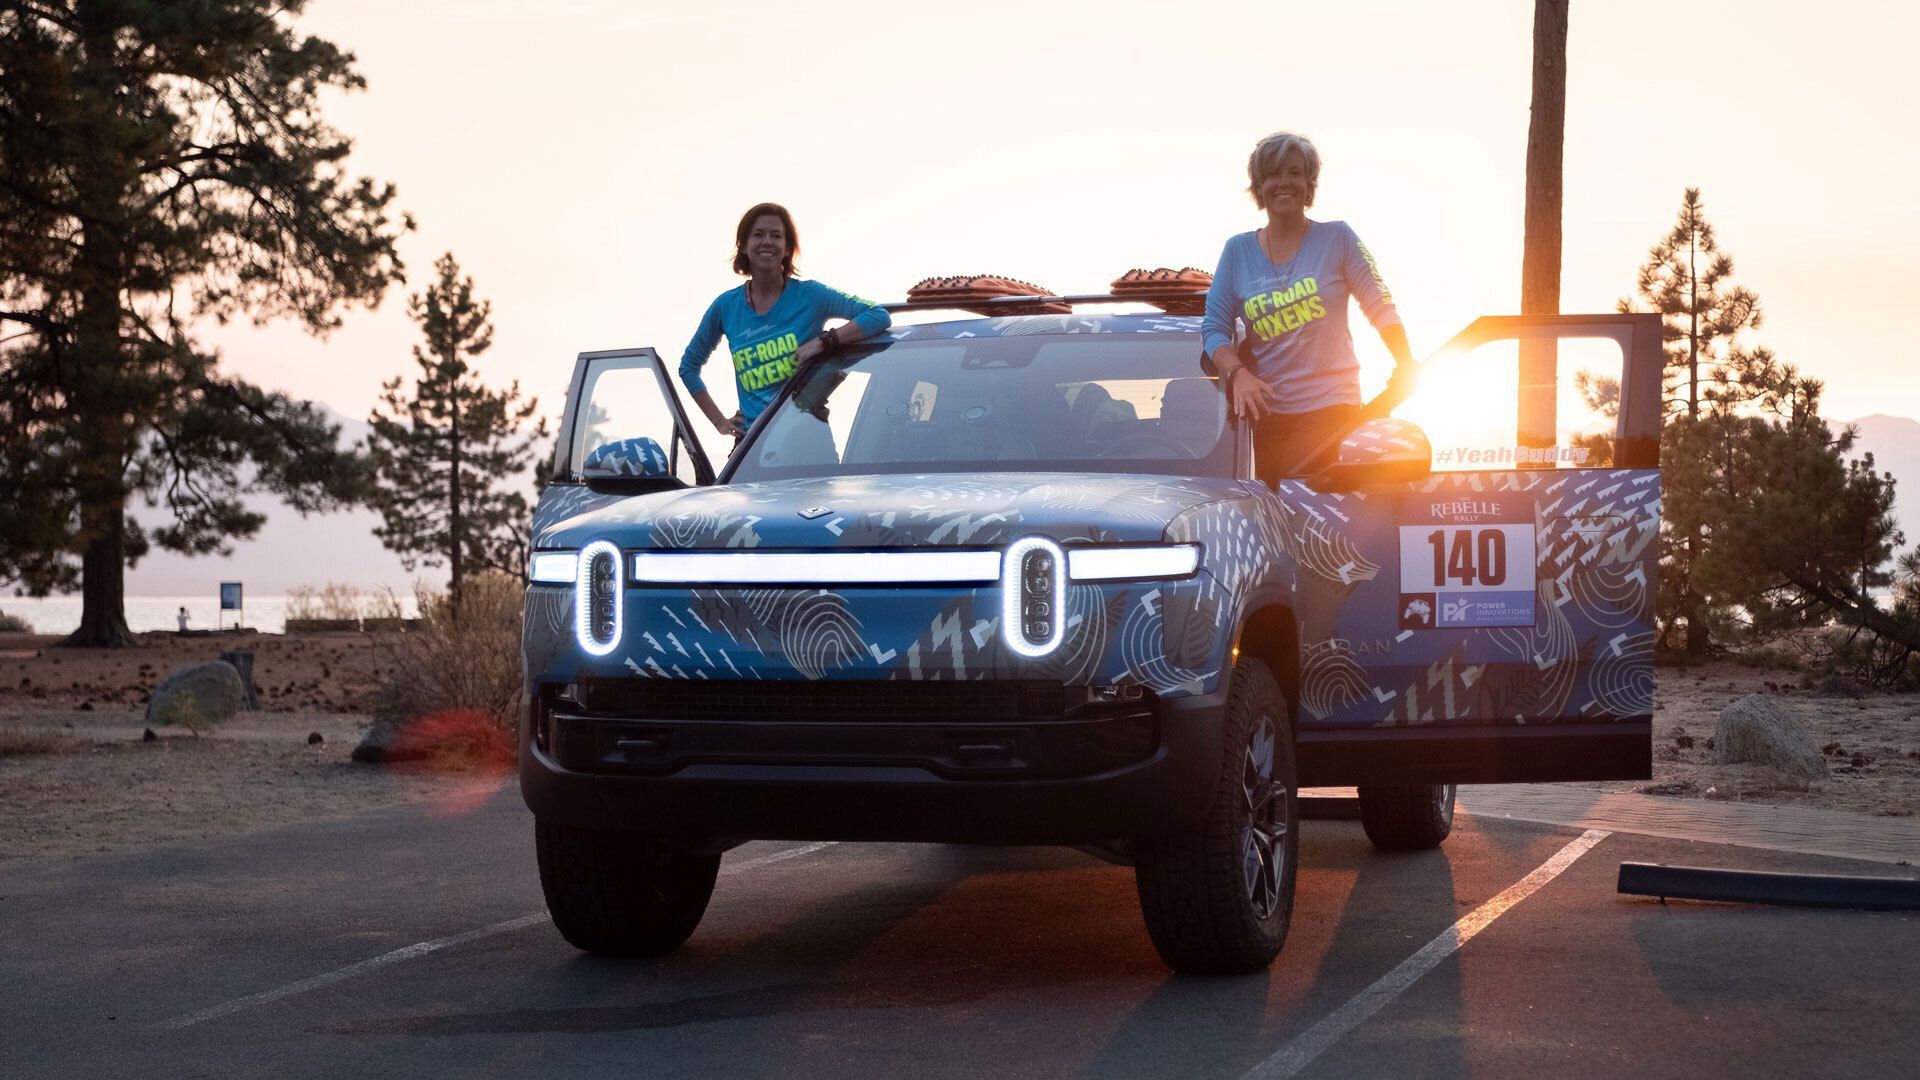 Rebecca Donaghe, left, and Emme Hall ahead of the off-road challenge. Photo: Rivian